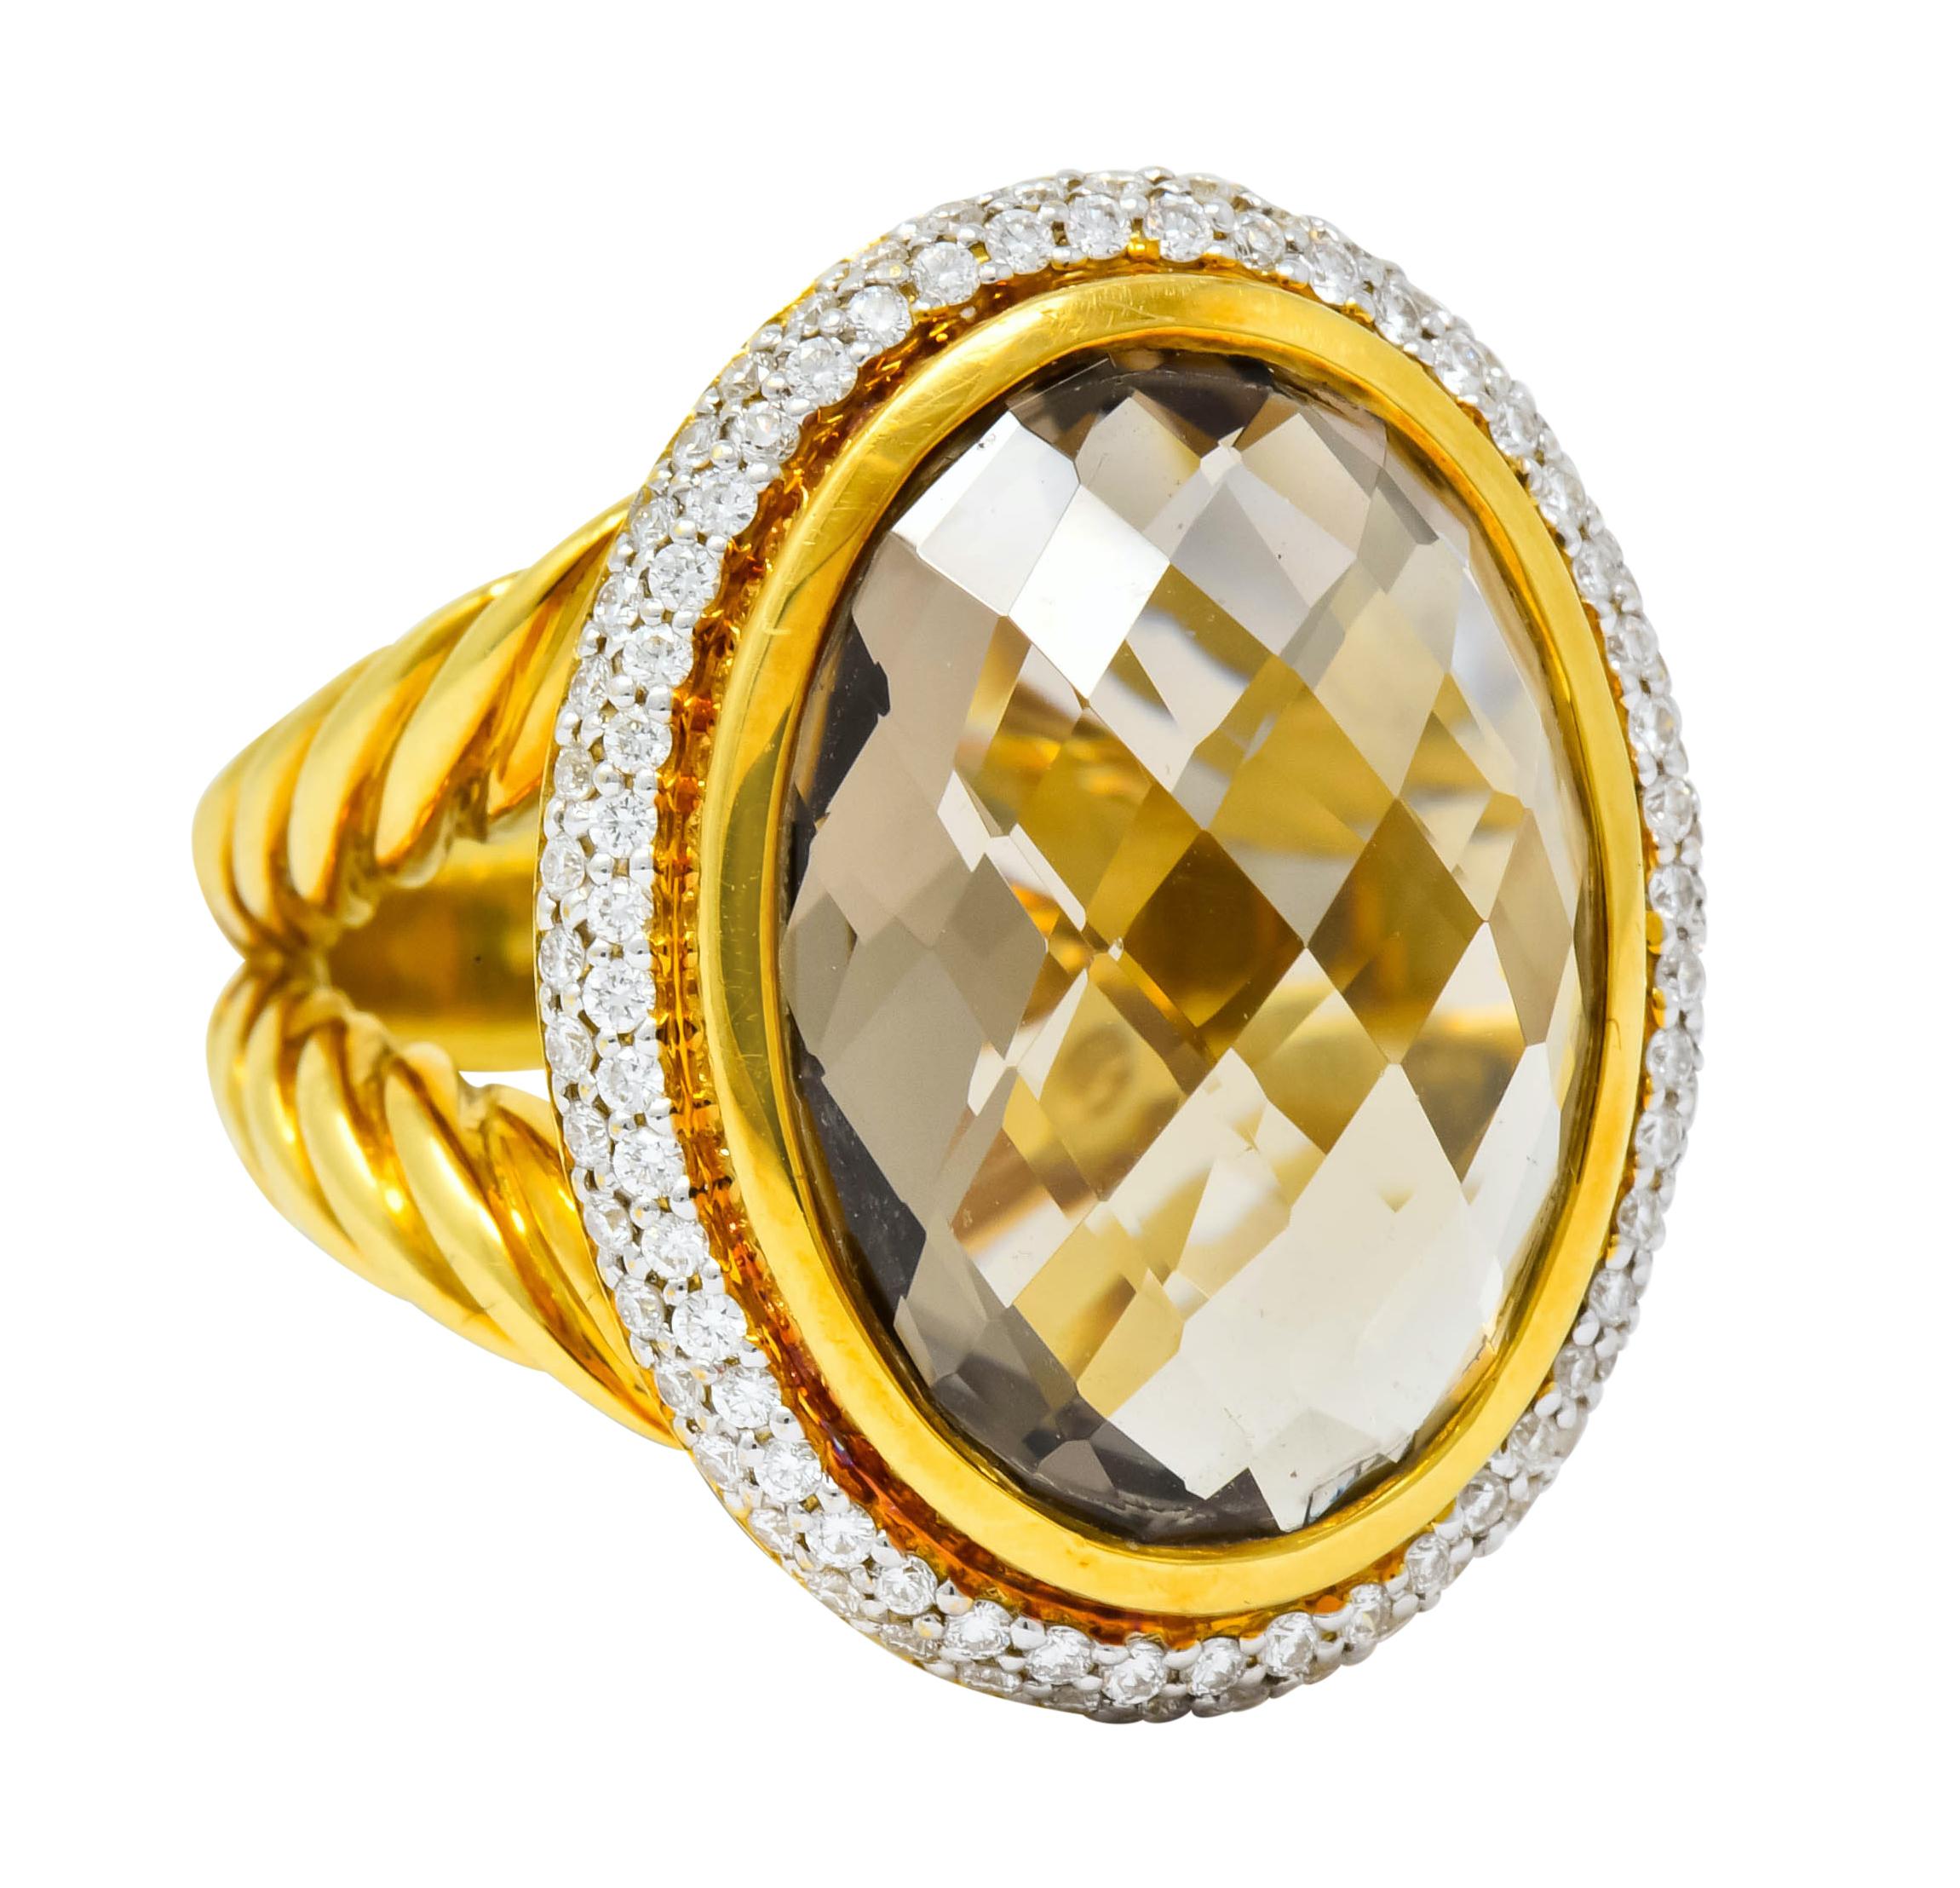 Centering an oval checkerboard cut topaz measuring approximately 18.0 x 13.0 mm, transparent and very light golden color

Bezel set in a polished gold surround with halo of pavé set round brilliant cut diamonds weighing approximately 1.00 carat